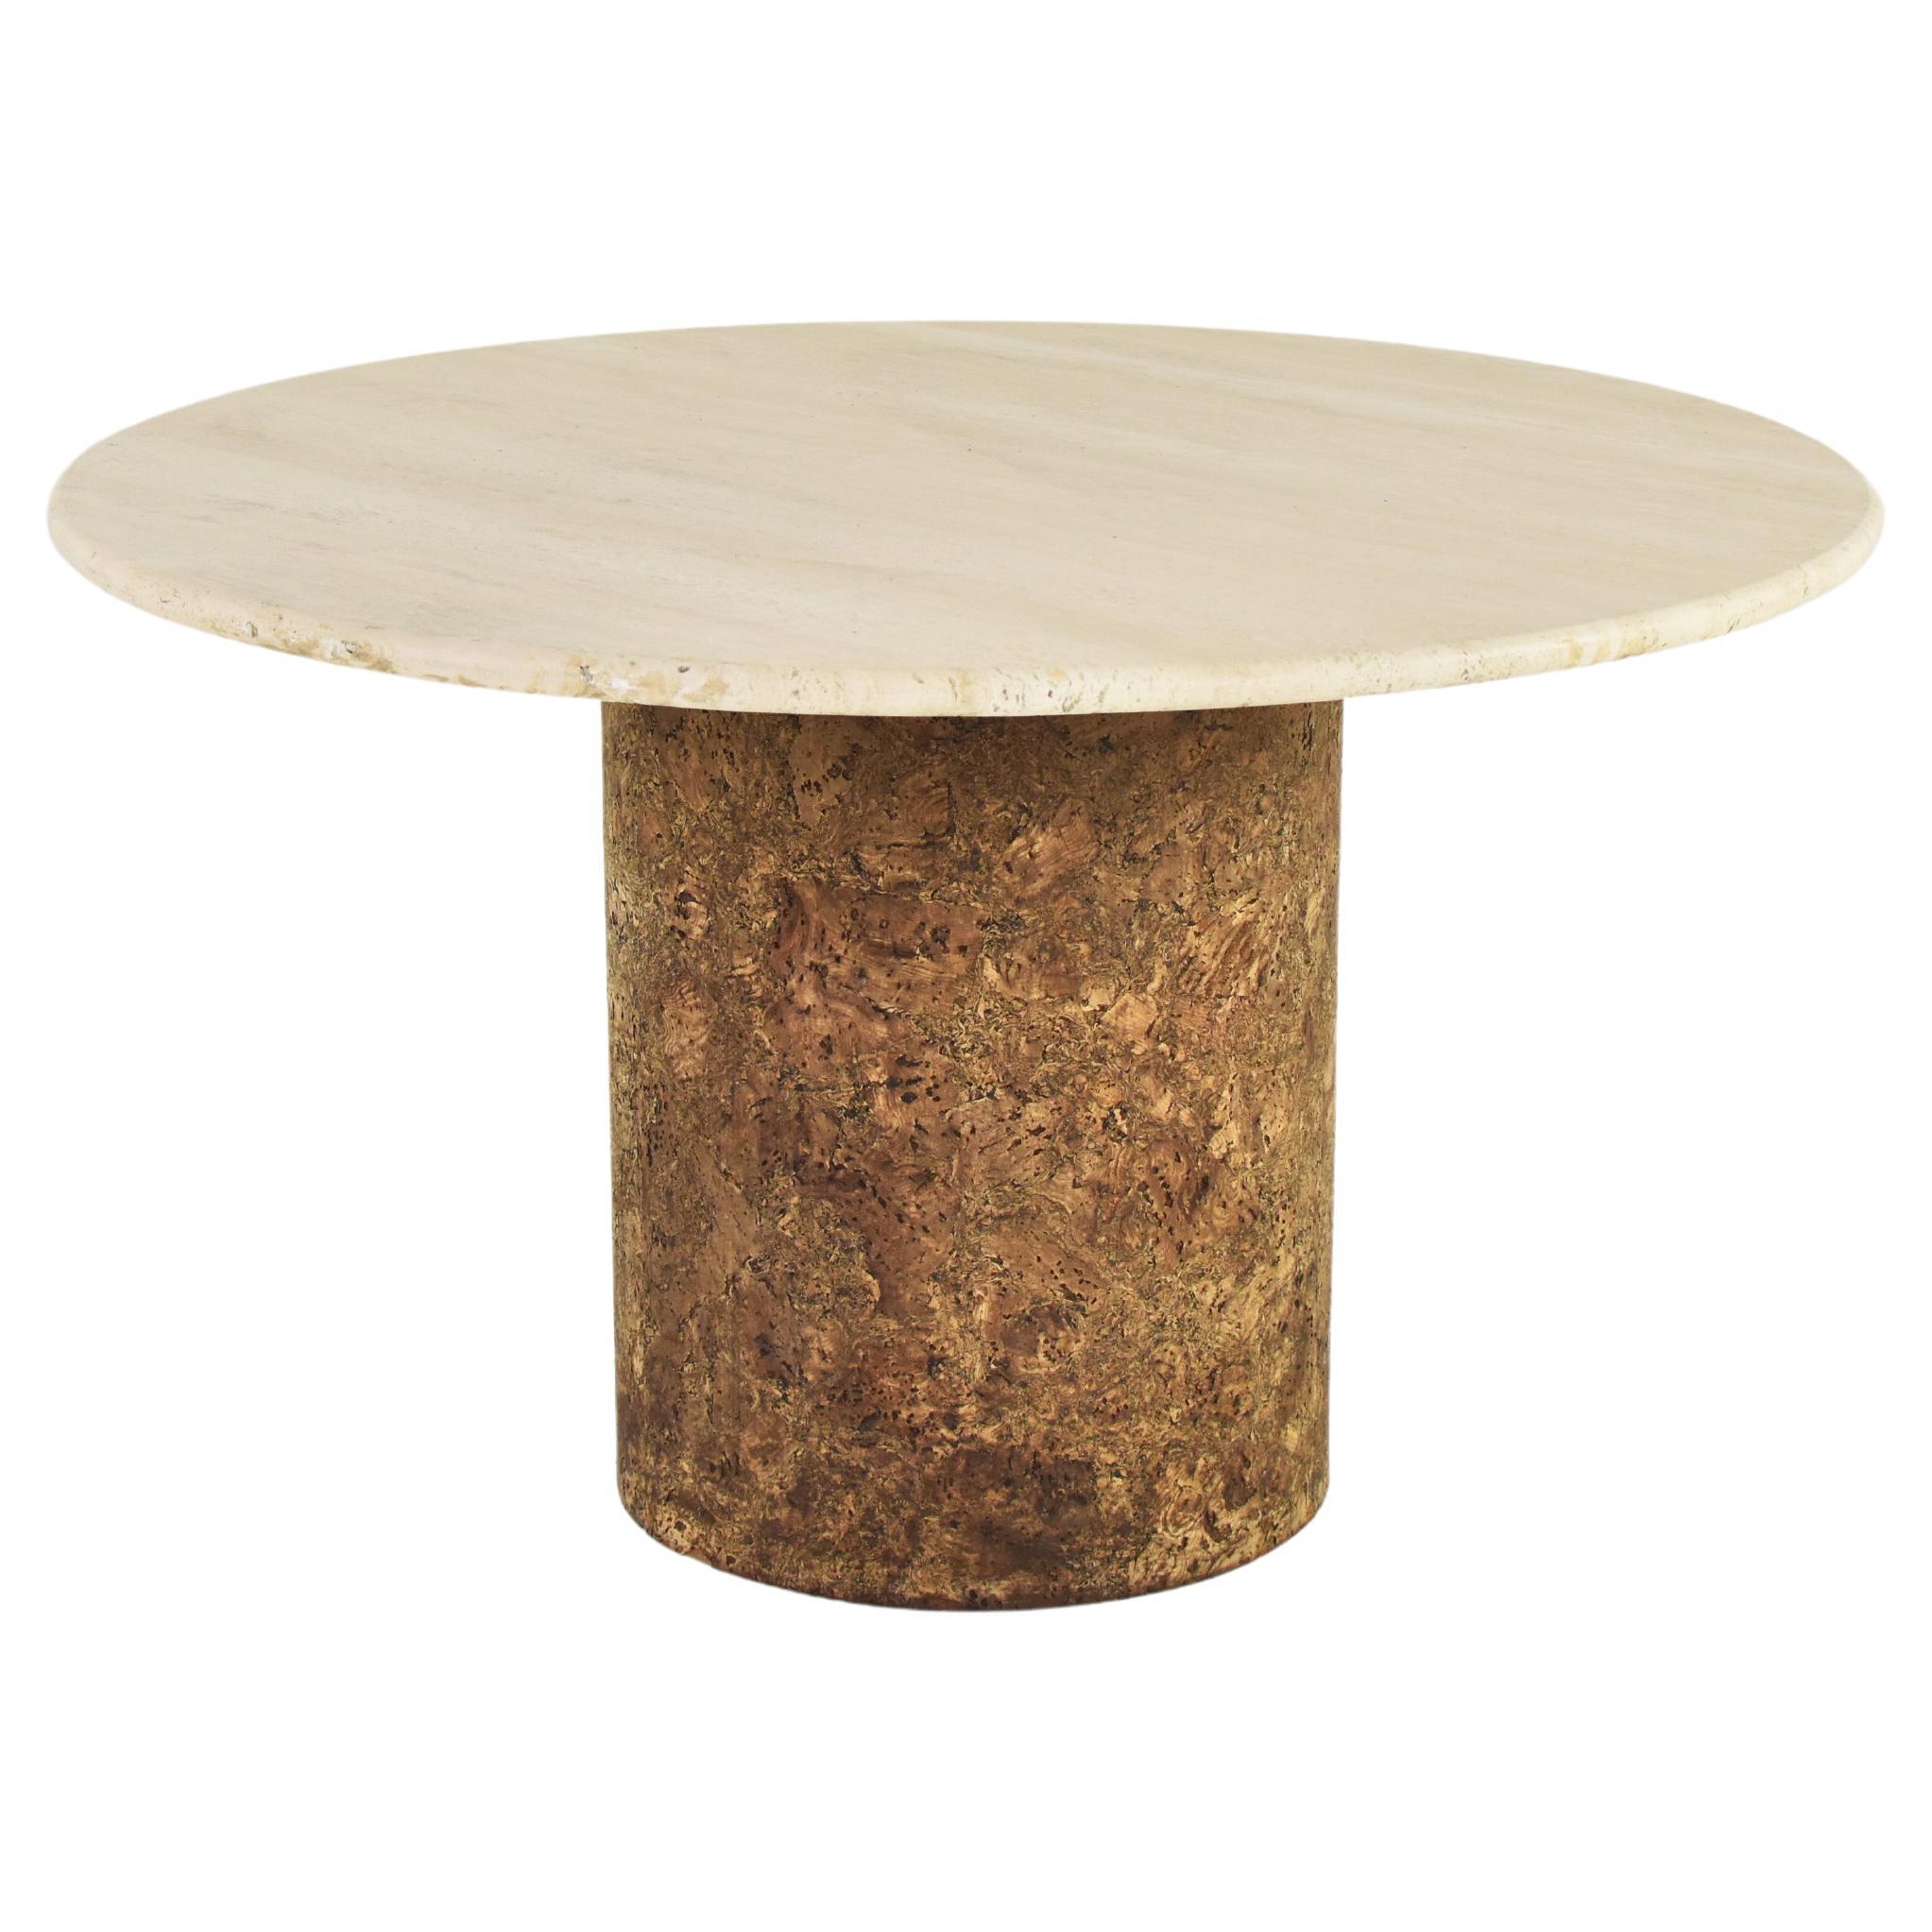 Dining Table in Travertine and Cork from the 1960’s